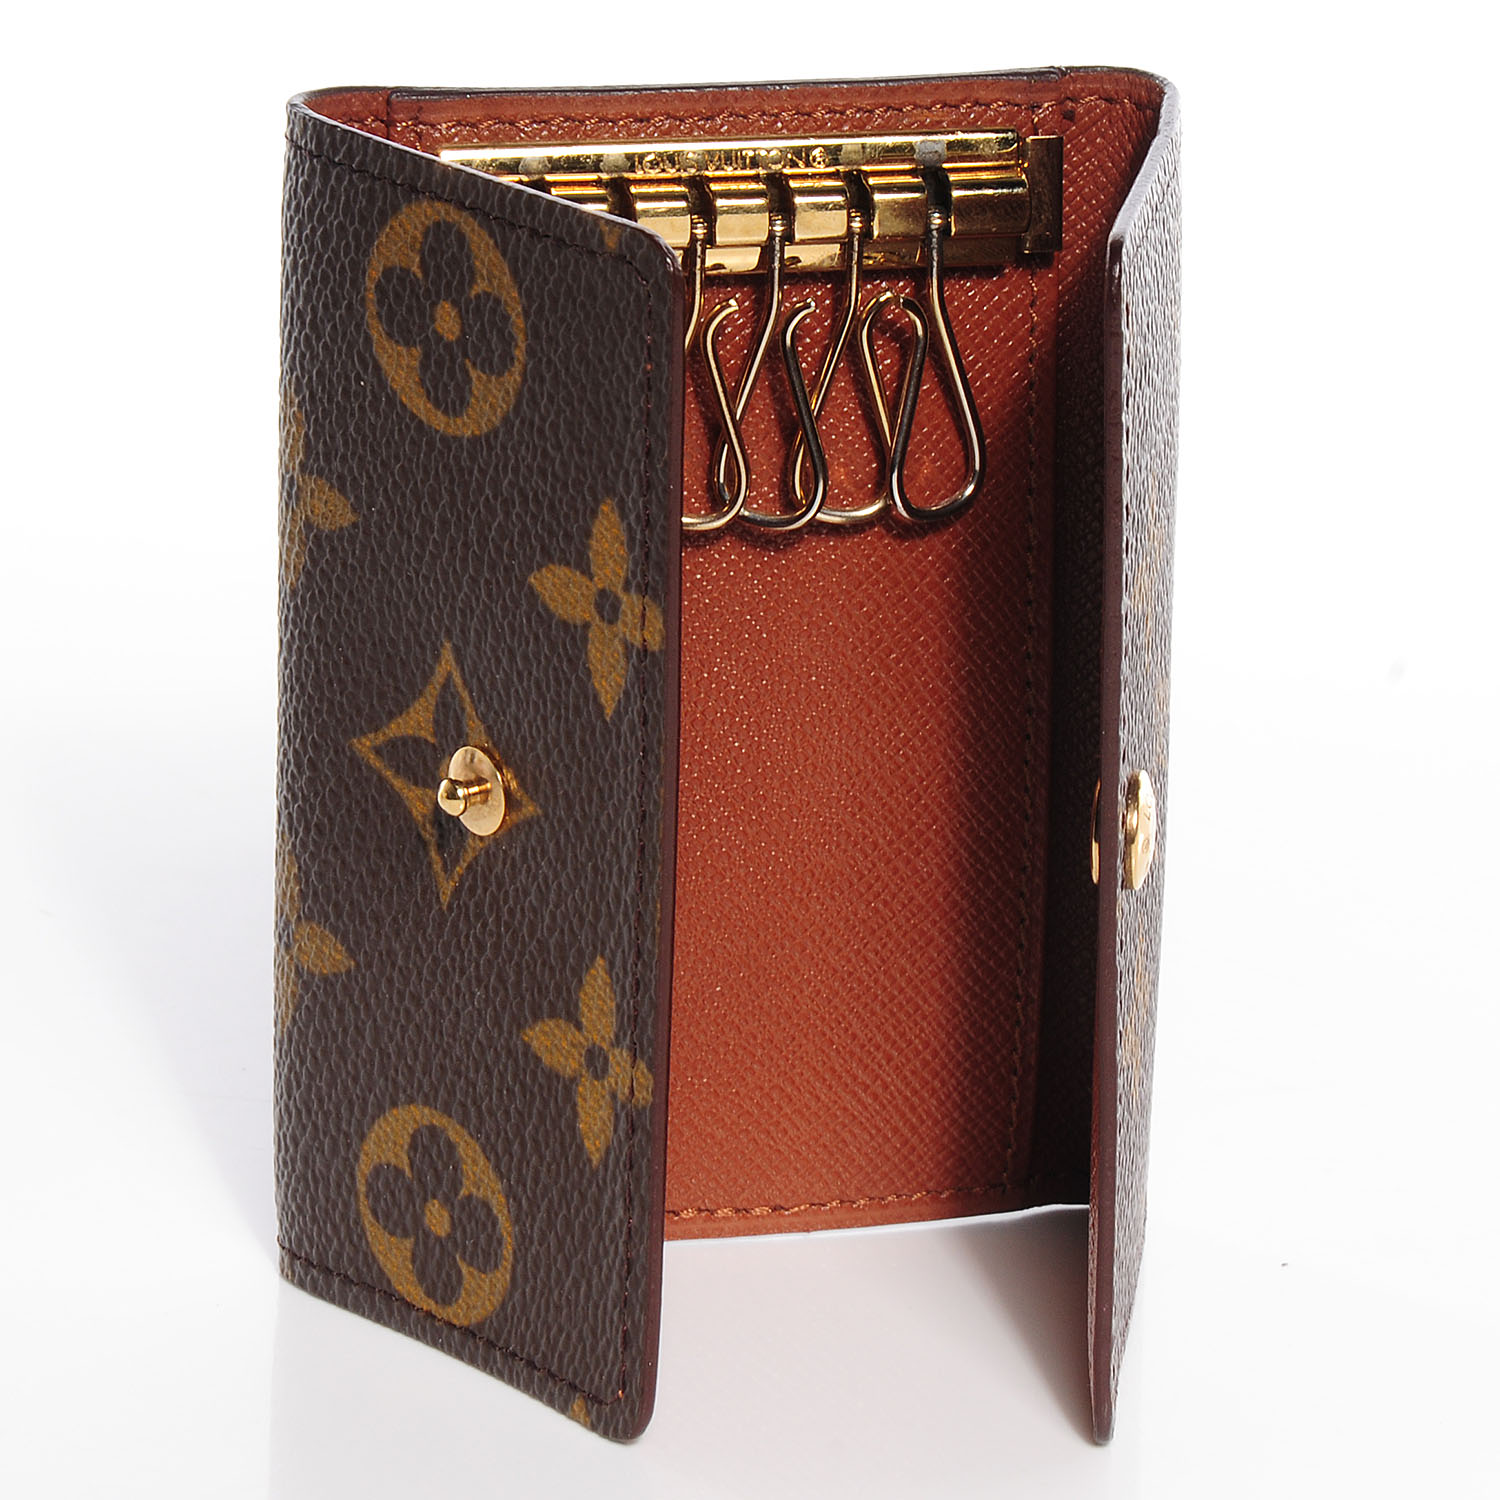 Louis Vuitton 6 Ring Key Holder Reviewed | IQS Executive